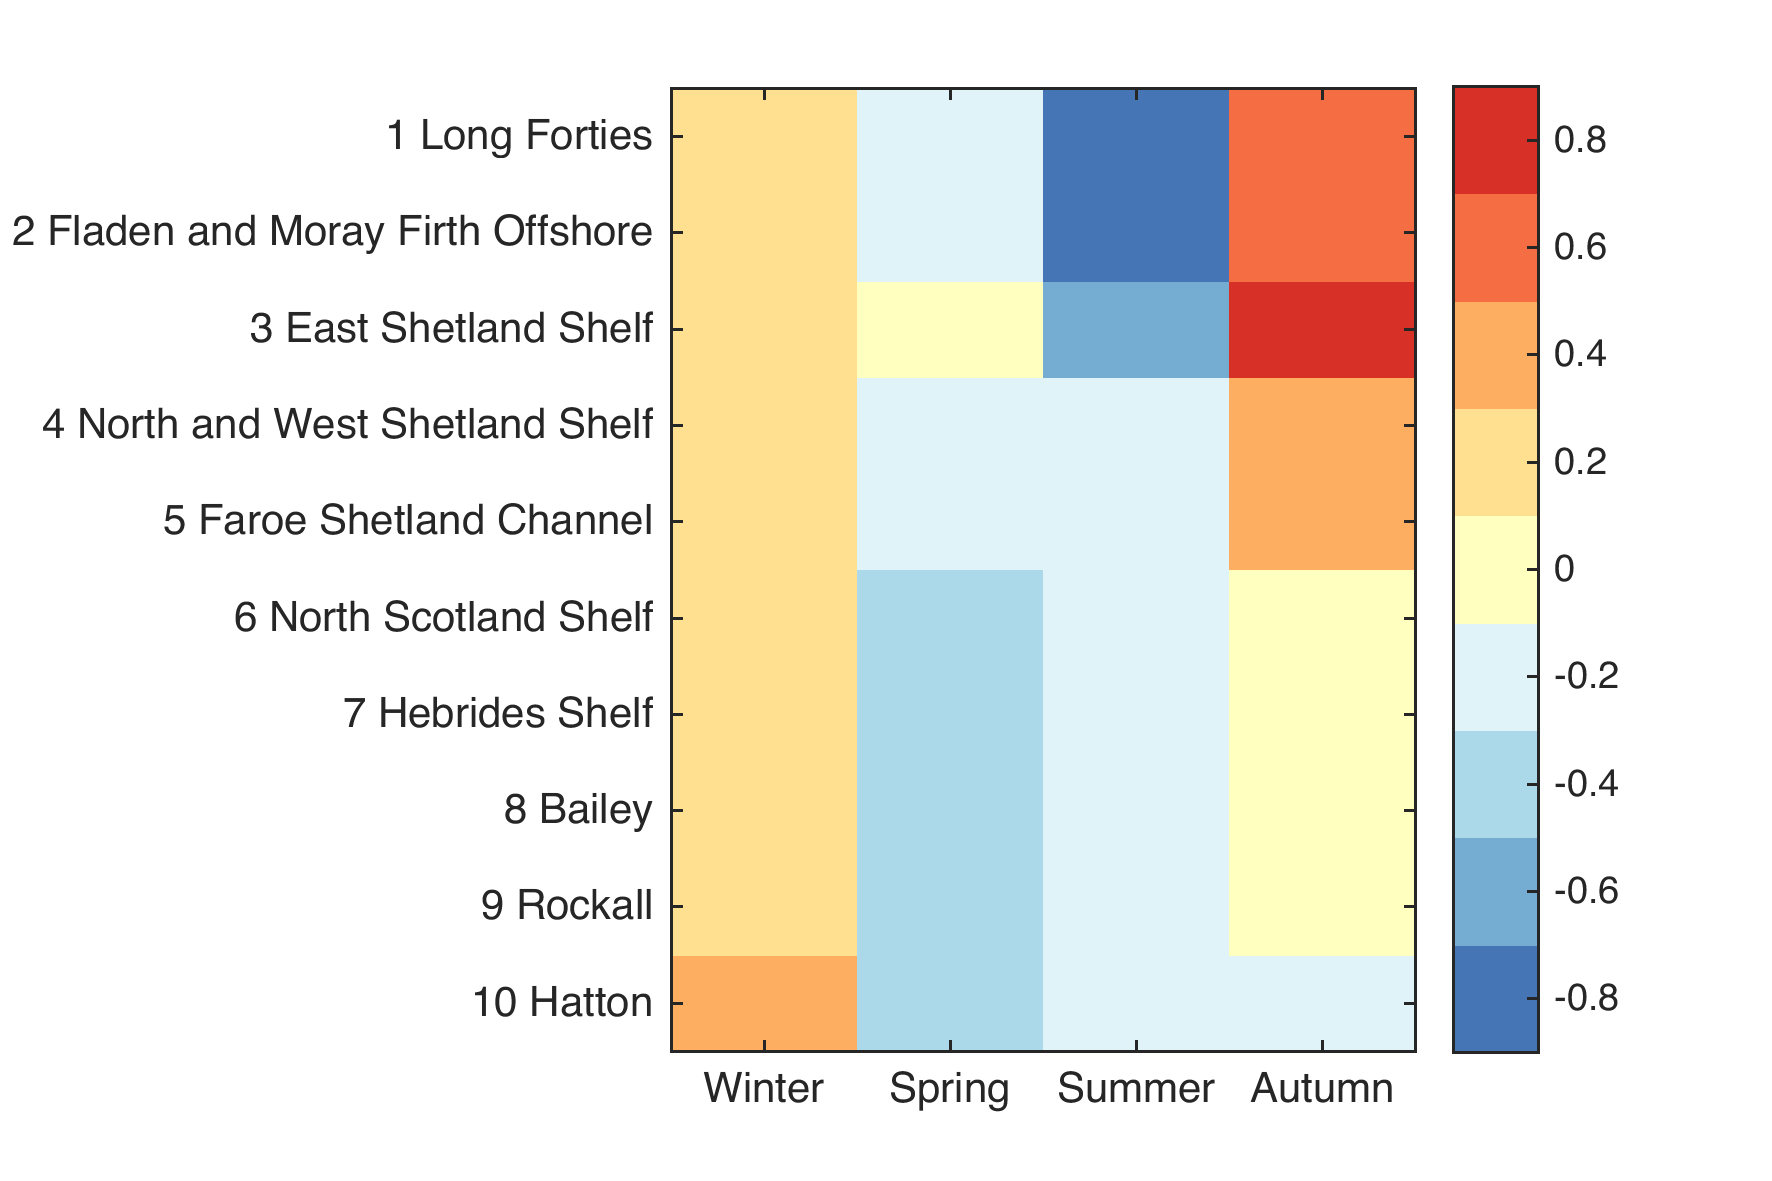 Figure 3: Normalised anomalies of seasonal climatological average significant wave height over the years 2011-2015 for the Offshore Marine Regions.